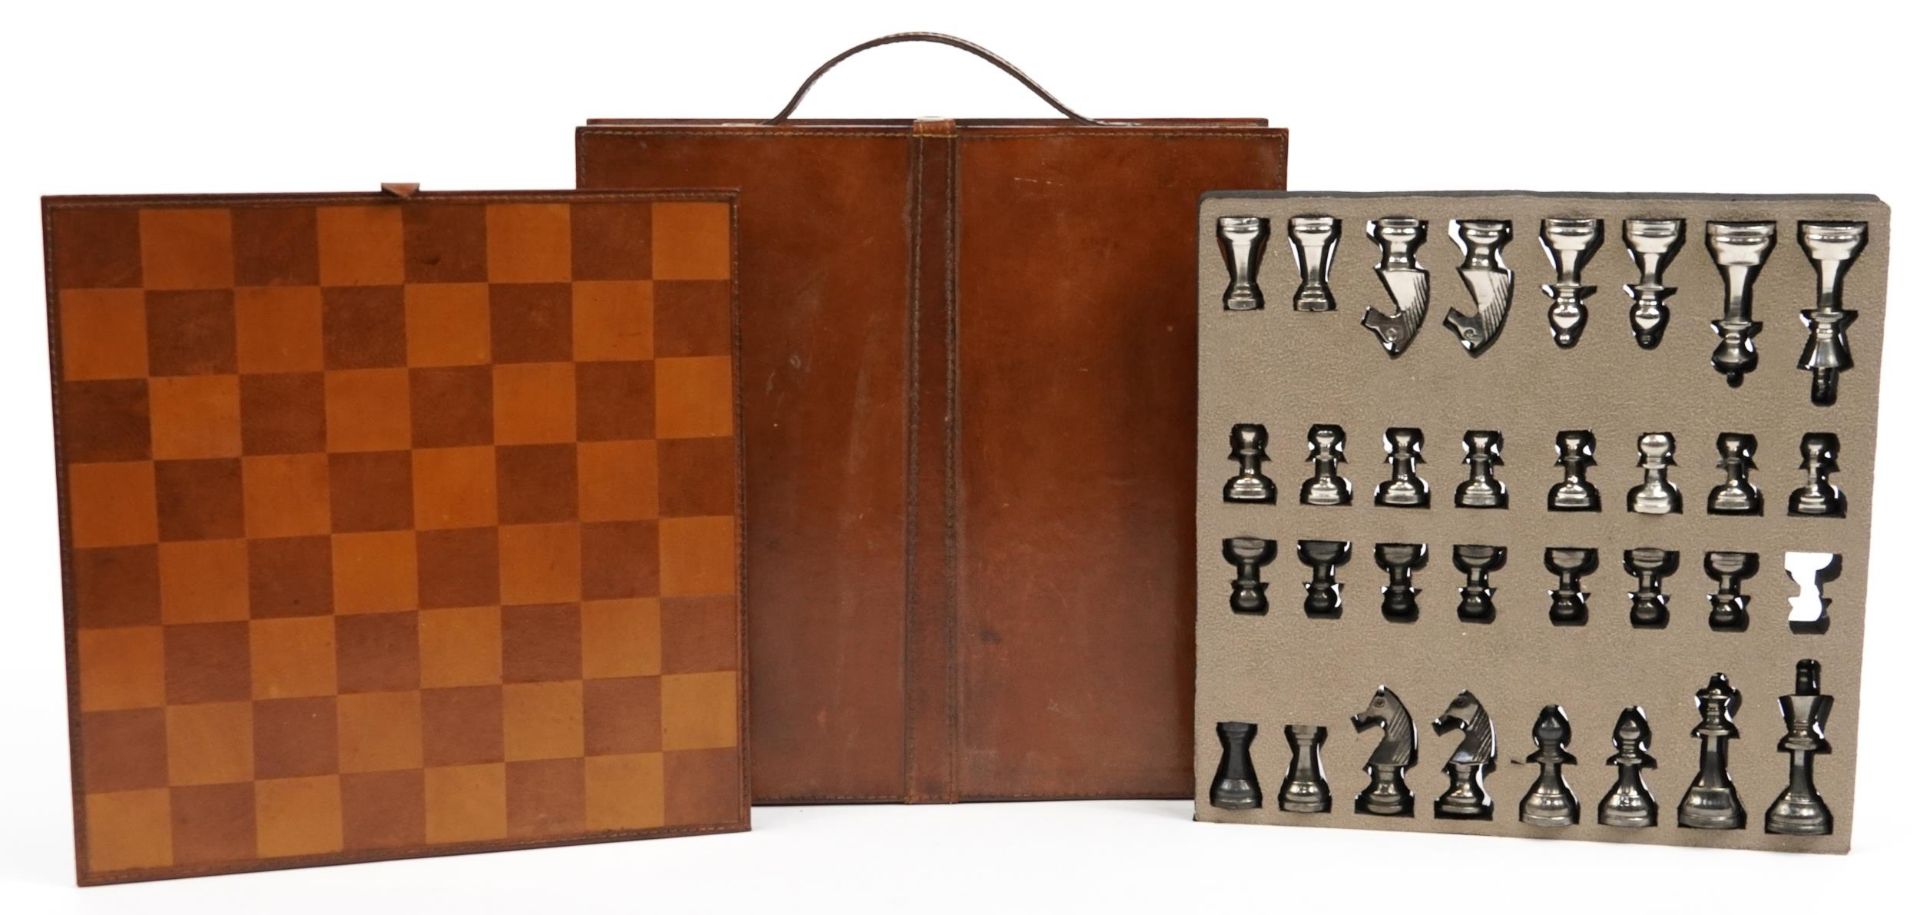 Tan leather cased travelling chess set with cast metal pieces, the largest piece 8cm high - Image 2 of 7